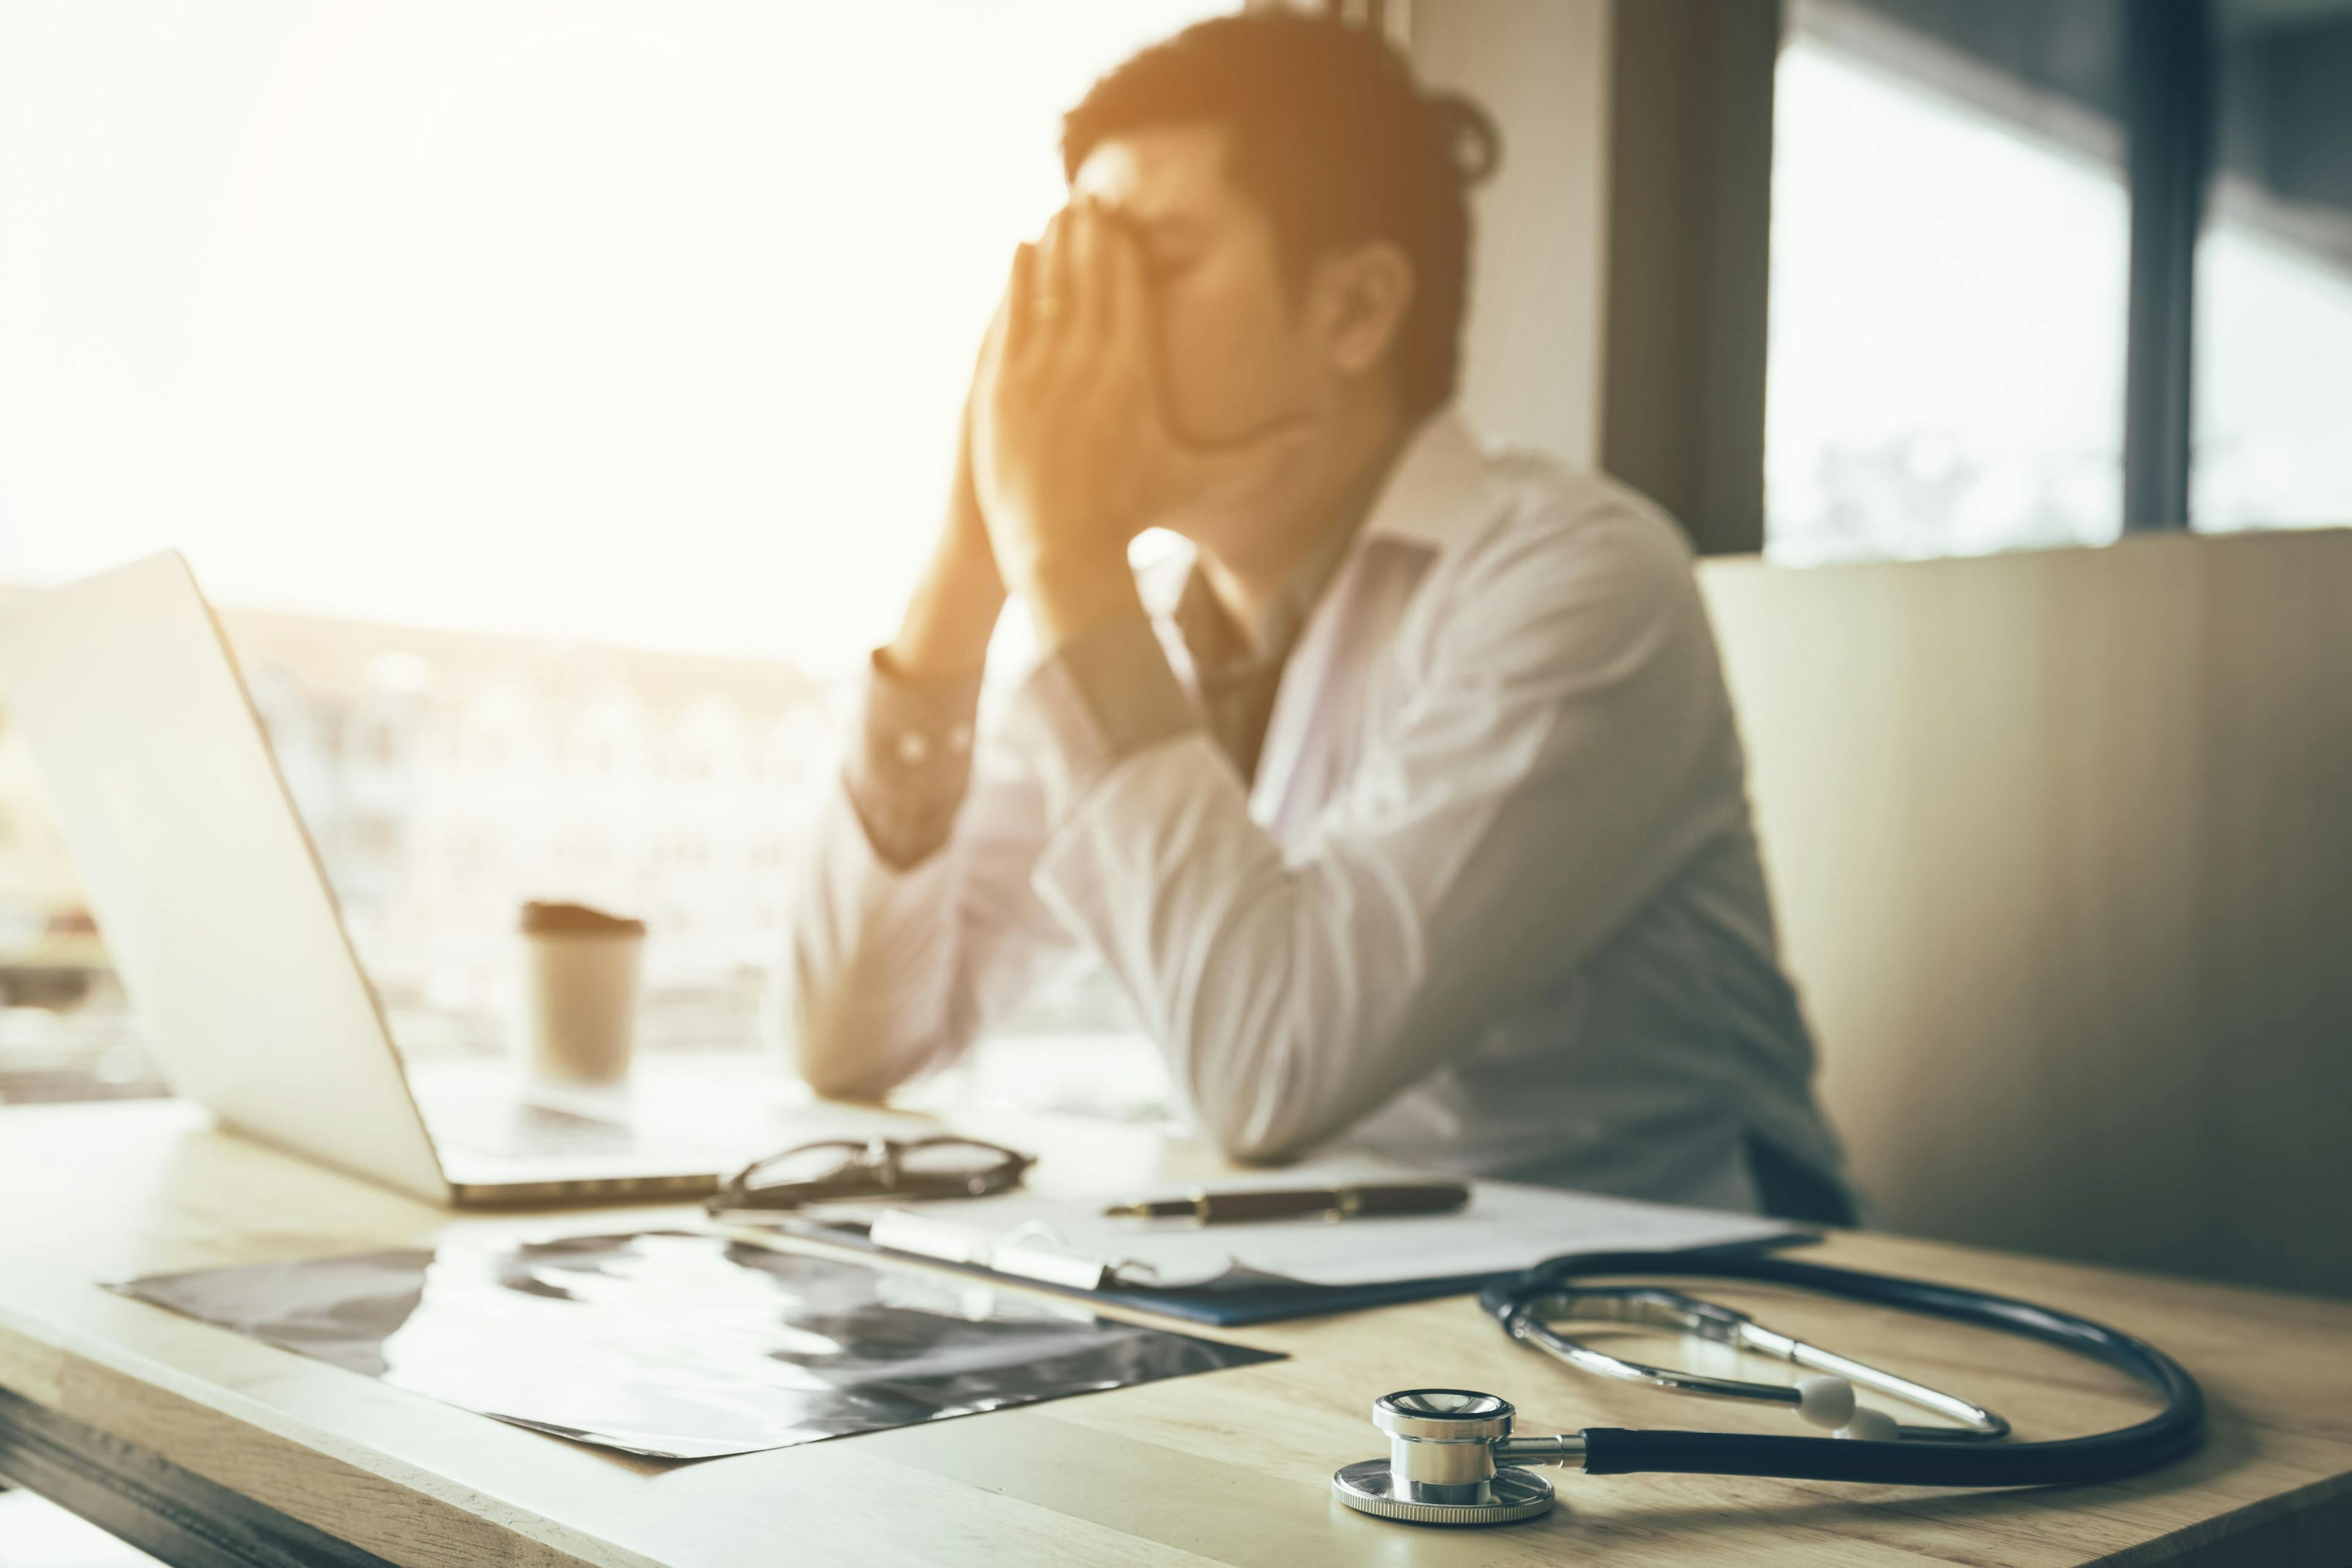 Burnout, Frustration Levels Continue to Grow Among Physicians